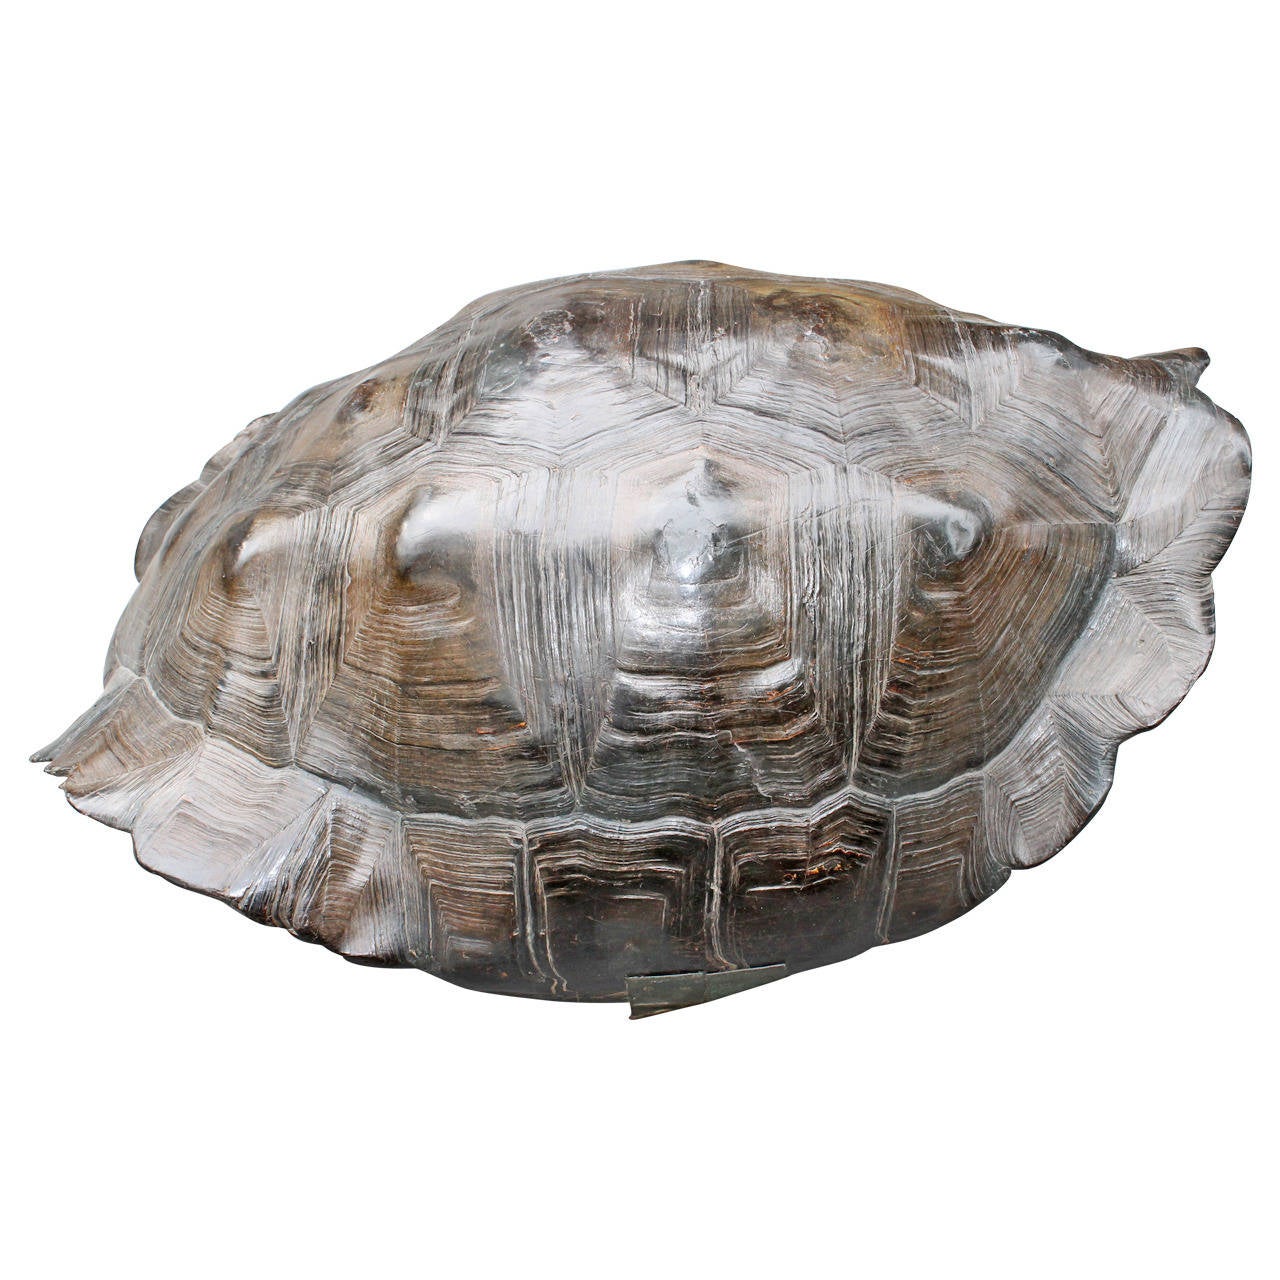 Shield of a giant tortoise from the Galapagos, ca. 1800 For Sale at 1stdibs